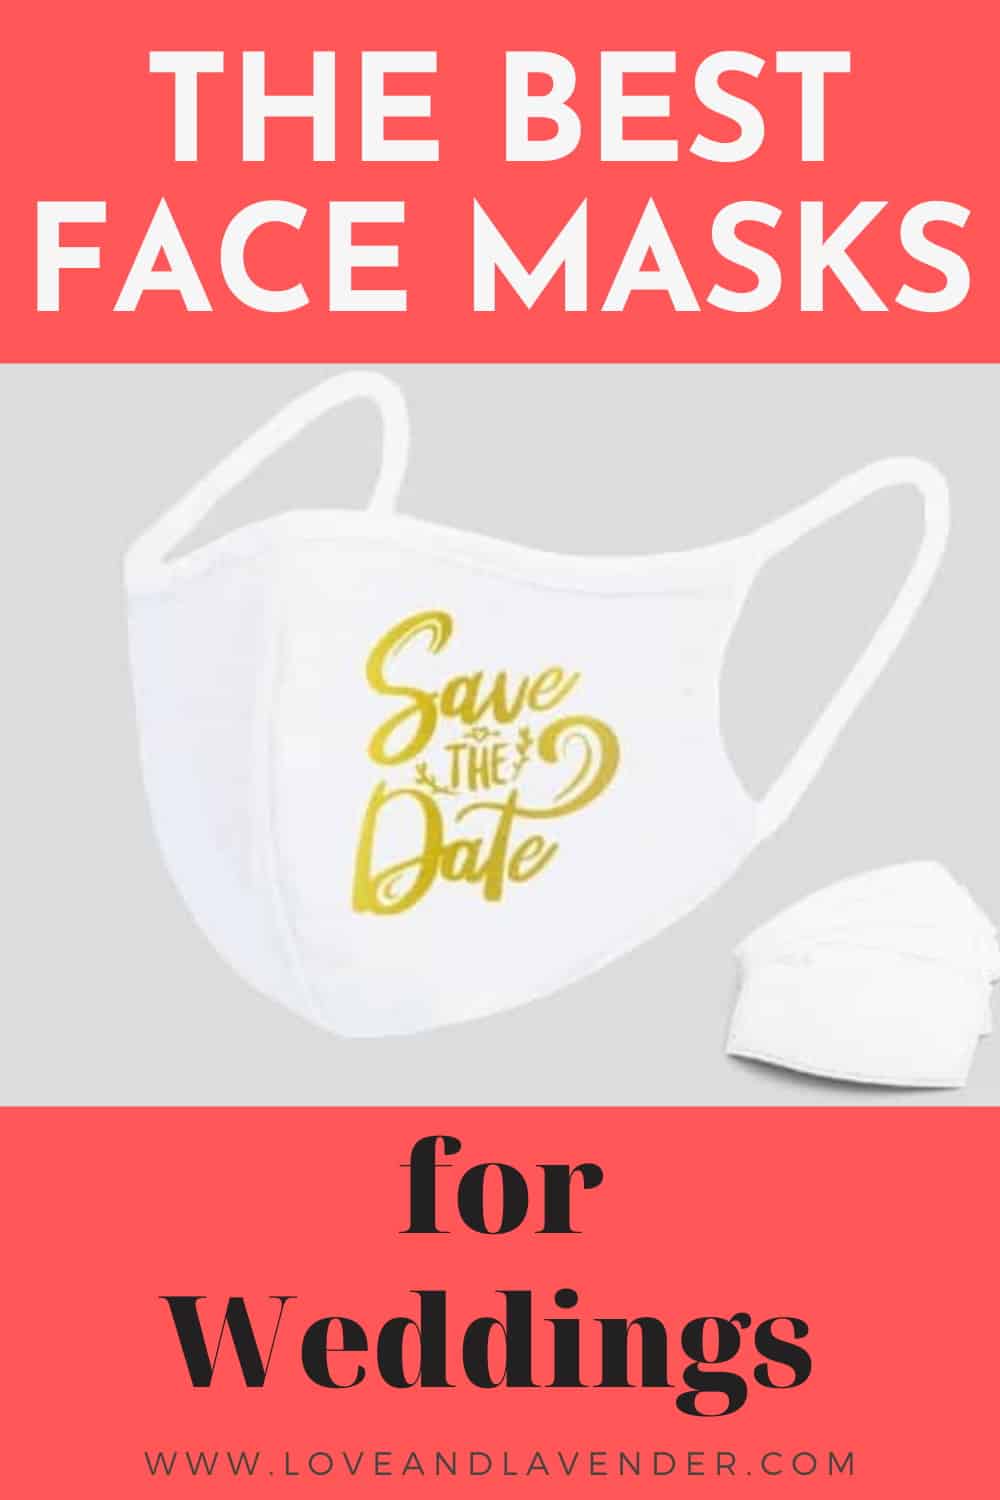 24 Wedding Face Mask Ideas For Brides, Grooms & Guests